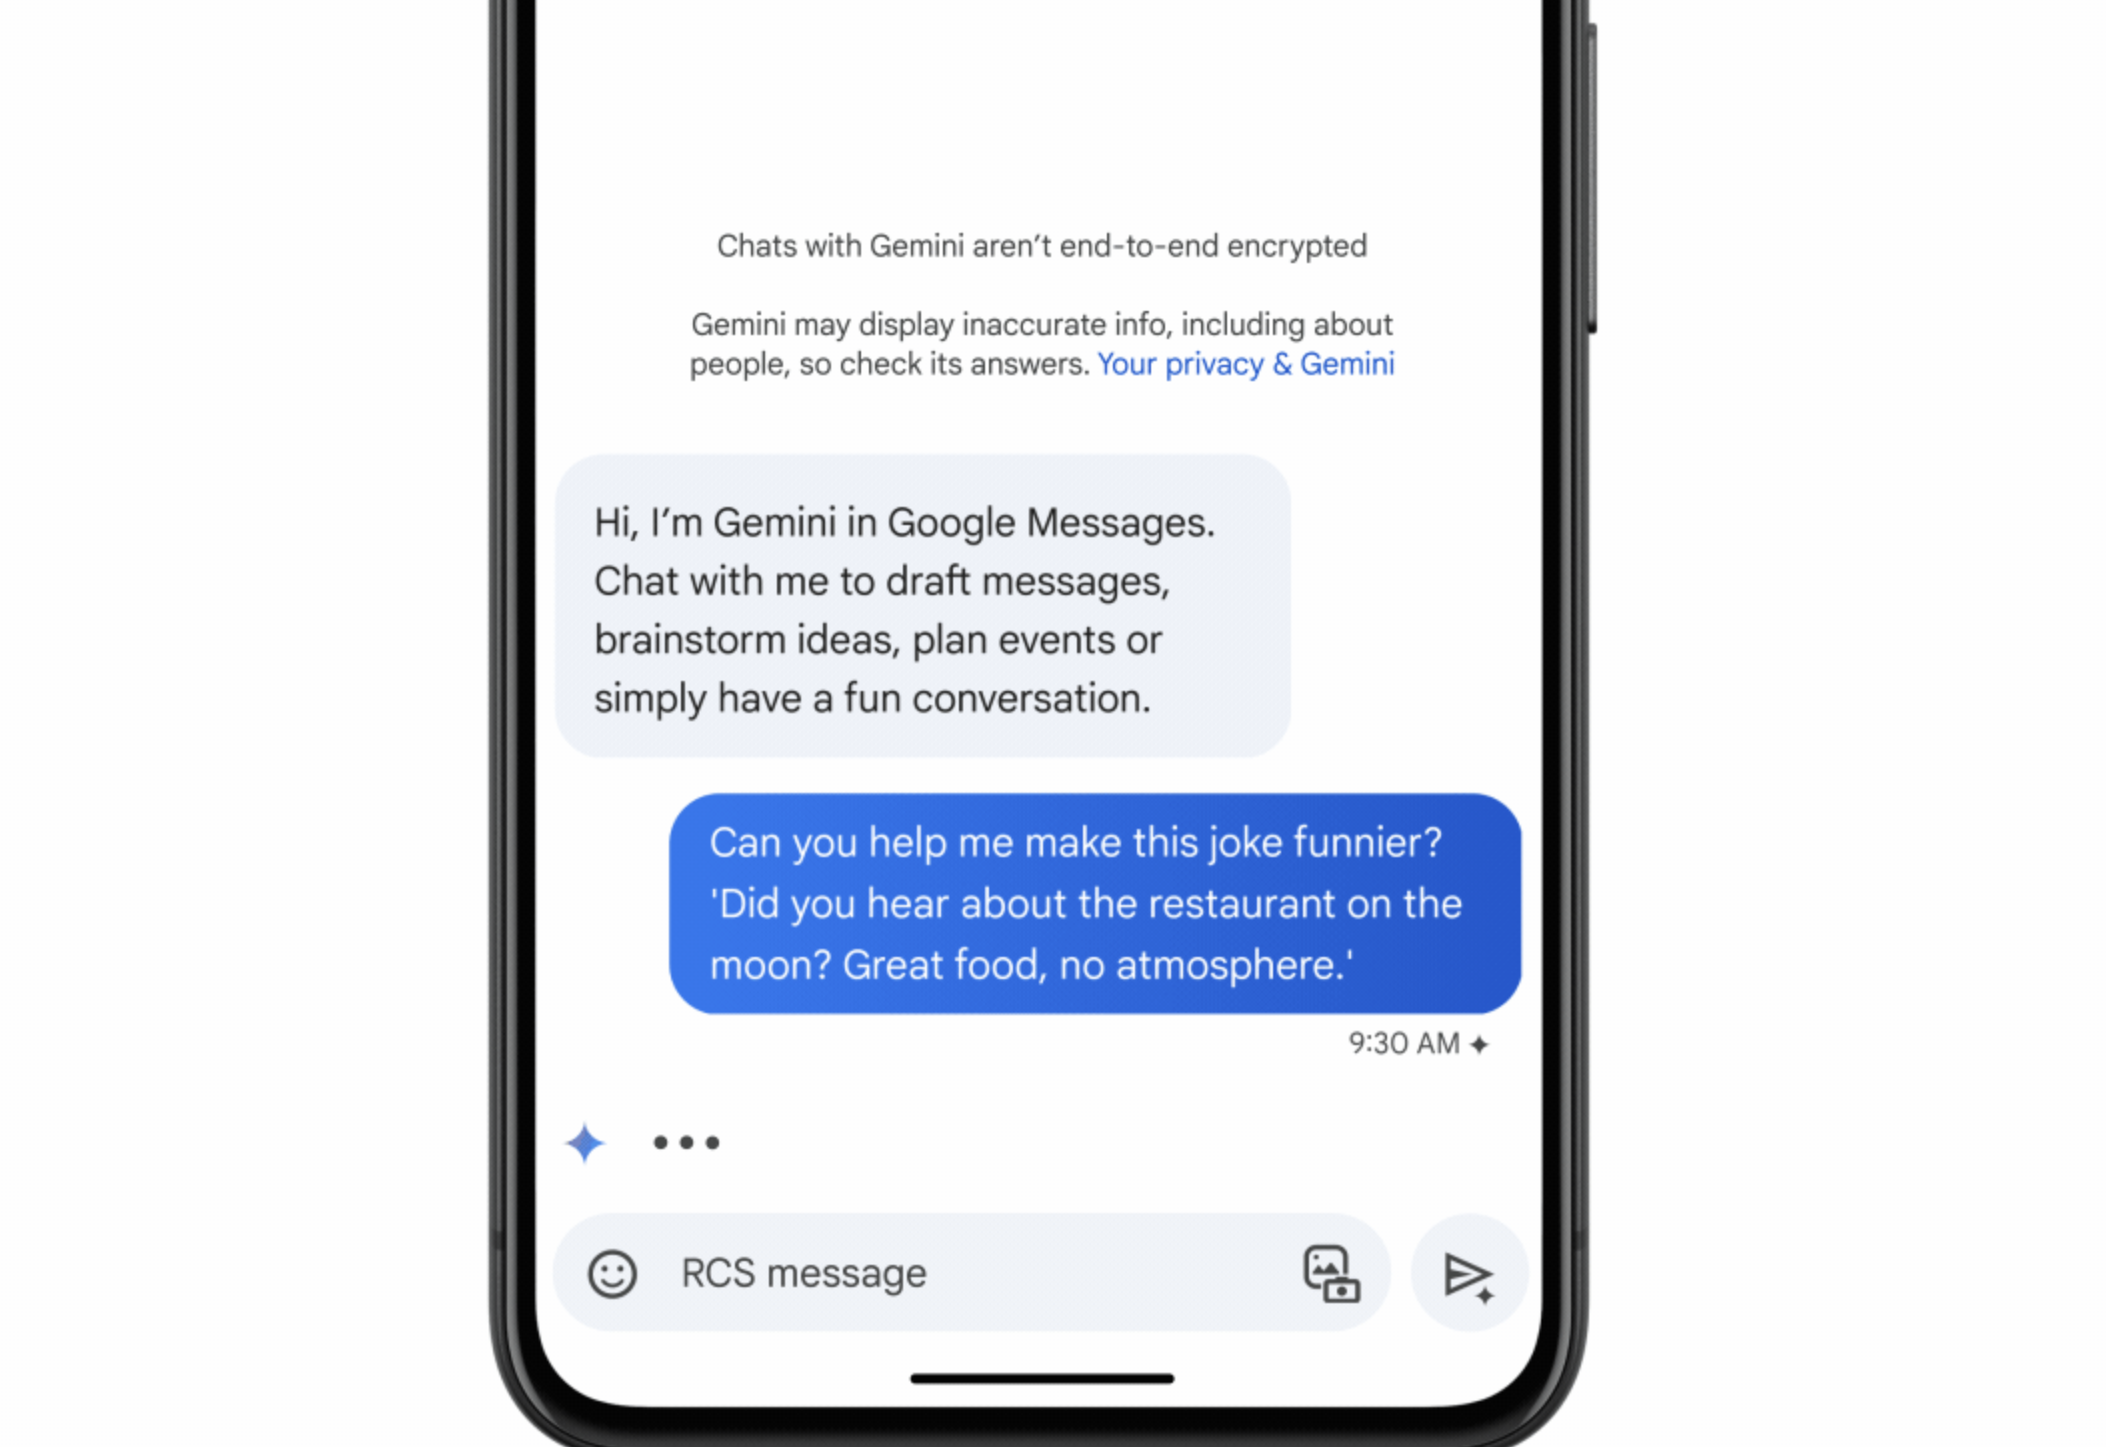 Google has integrated the Gemini chatbot into the Messages app and added AI-based text summary generation to Android Auto